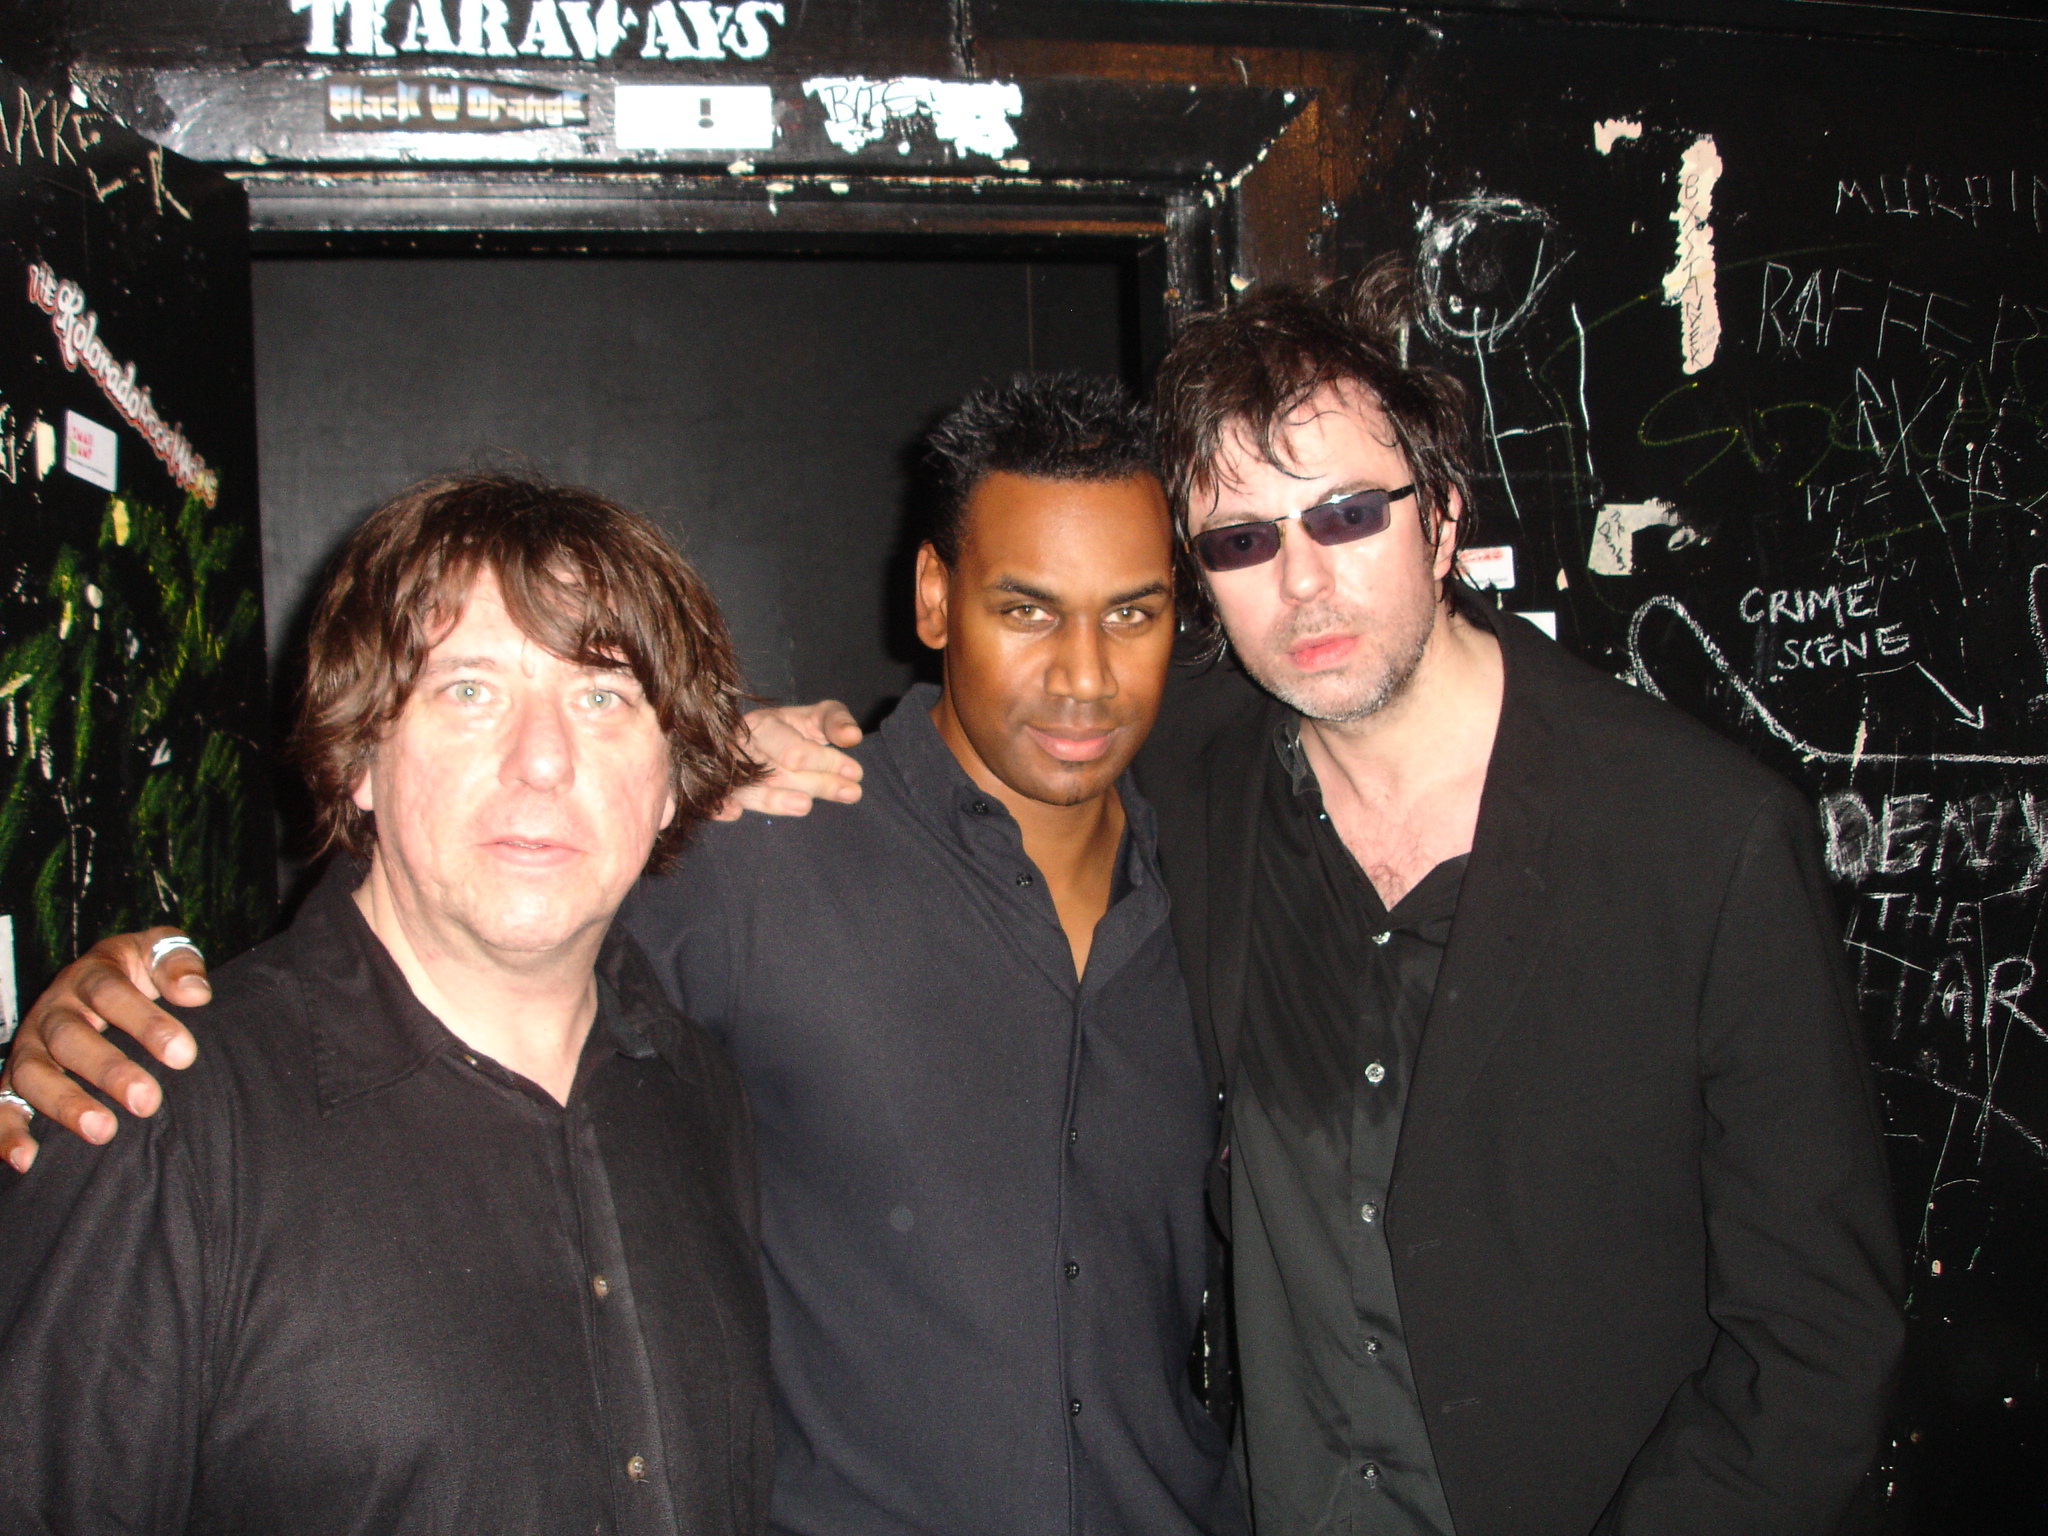 Echo and the Bunnymen 07 (6)